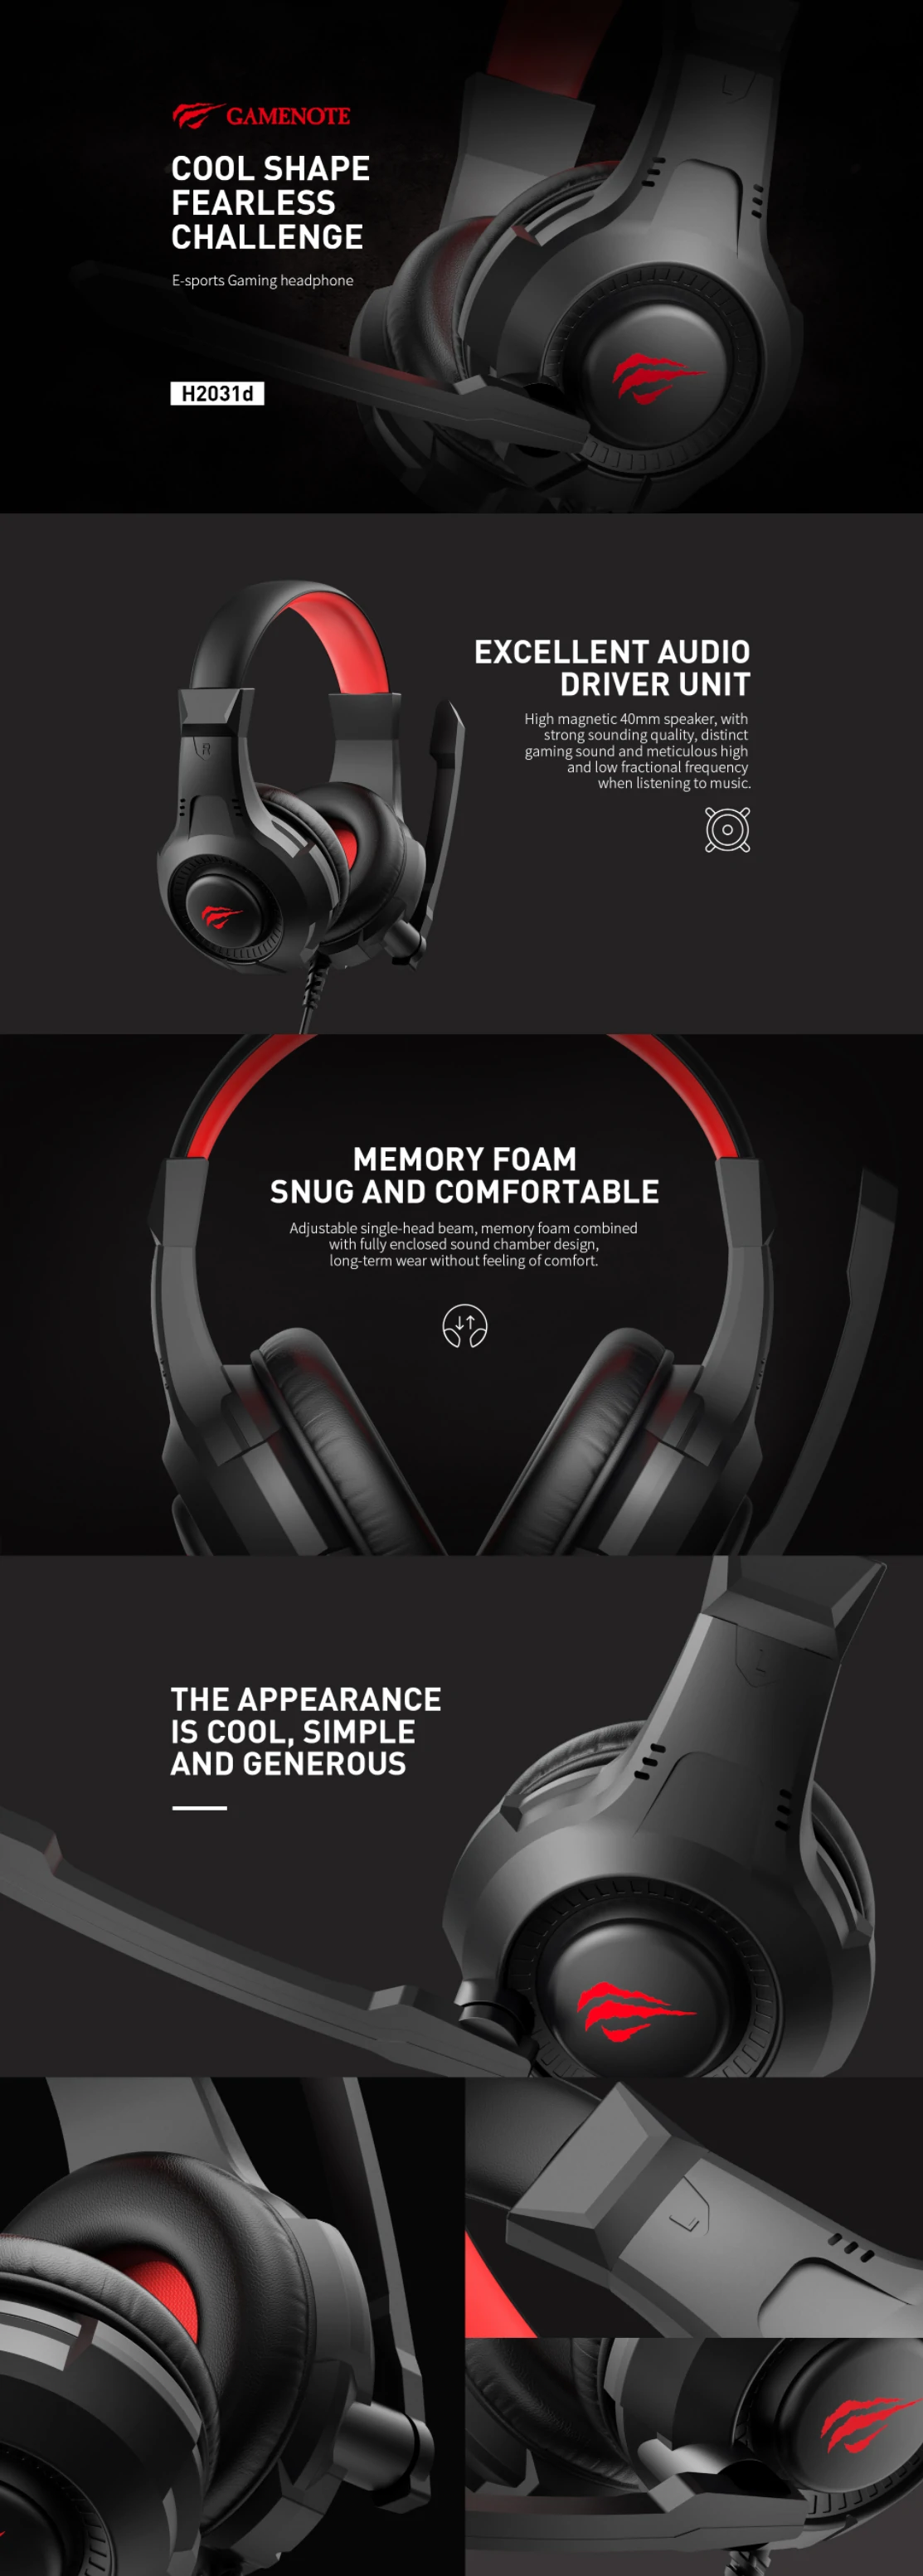 Overview - Havit - H2031d Gaming Headset